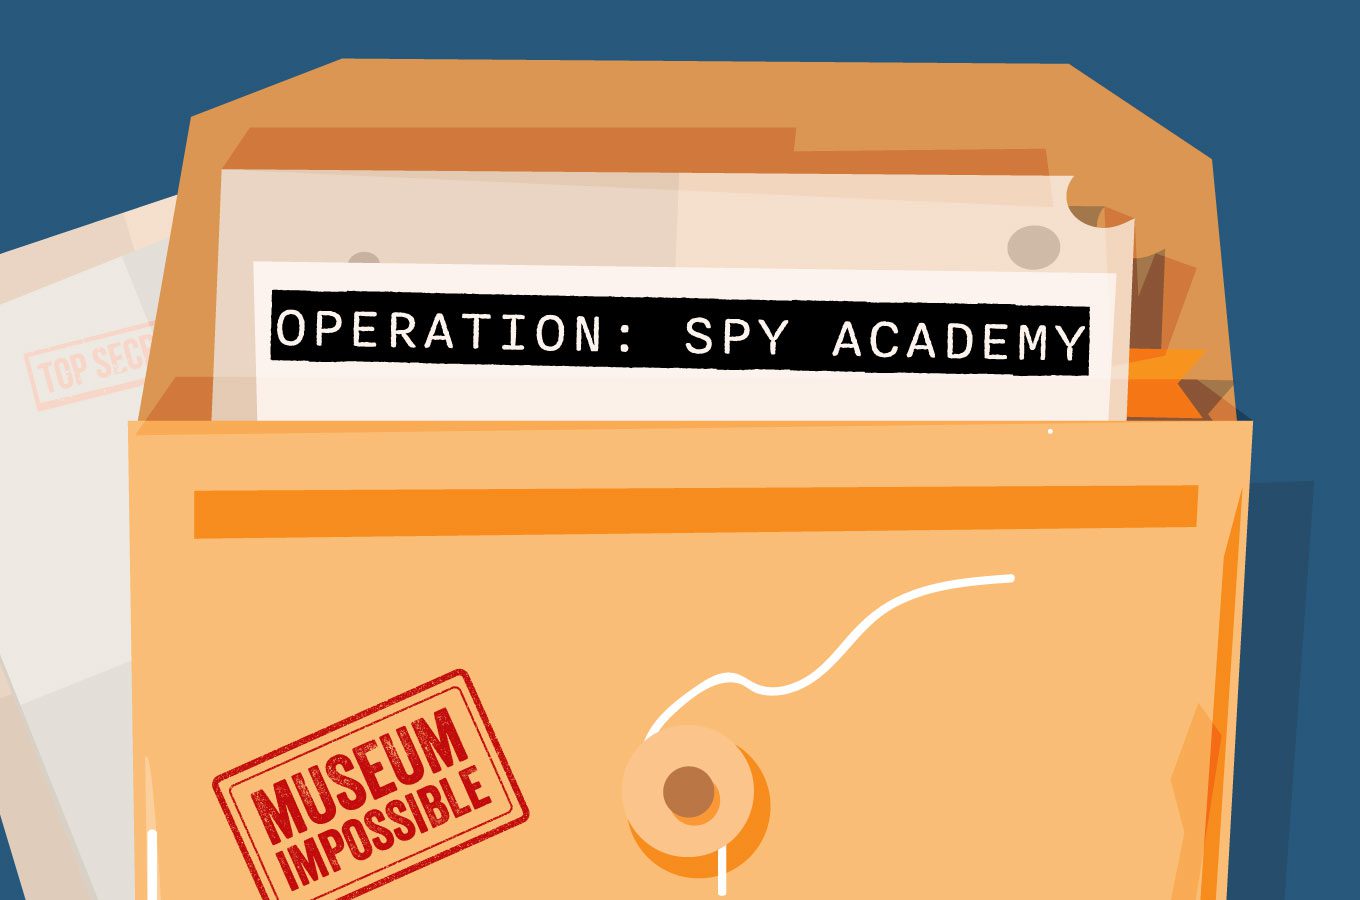 Museum Impossible- Operation: Spy Academy